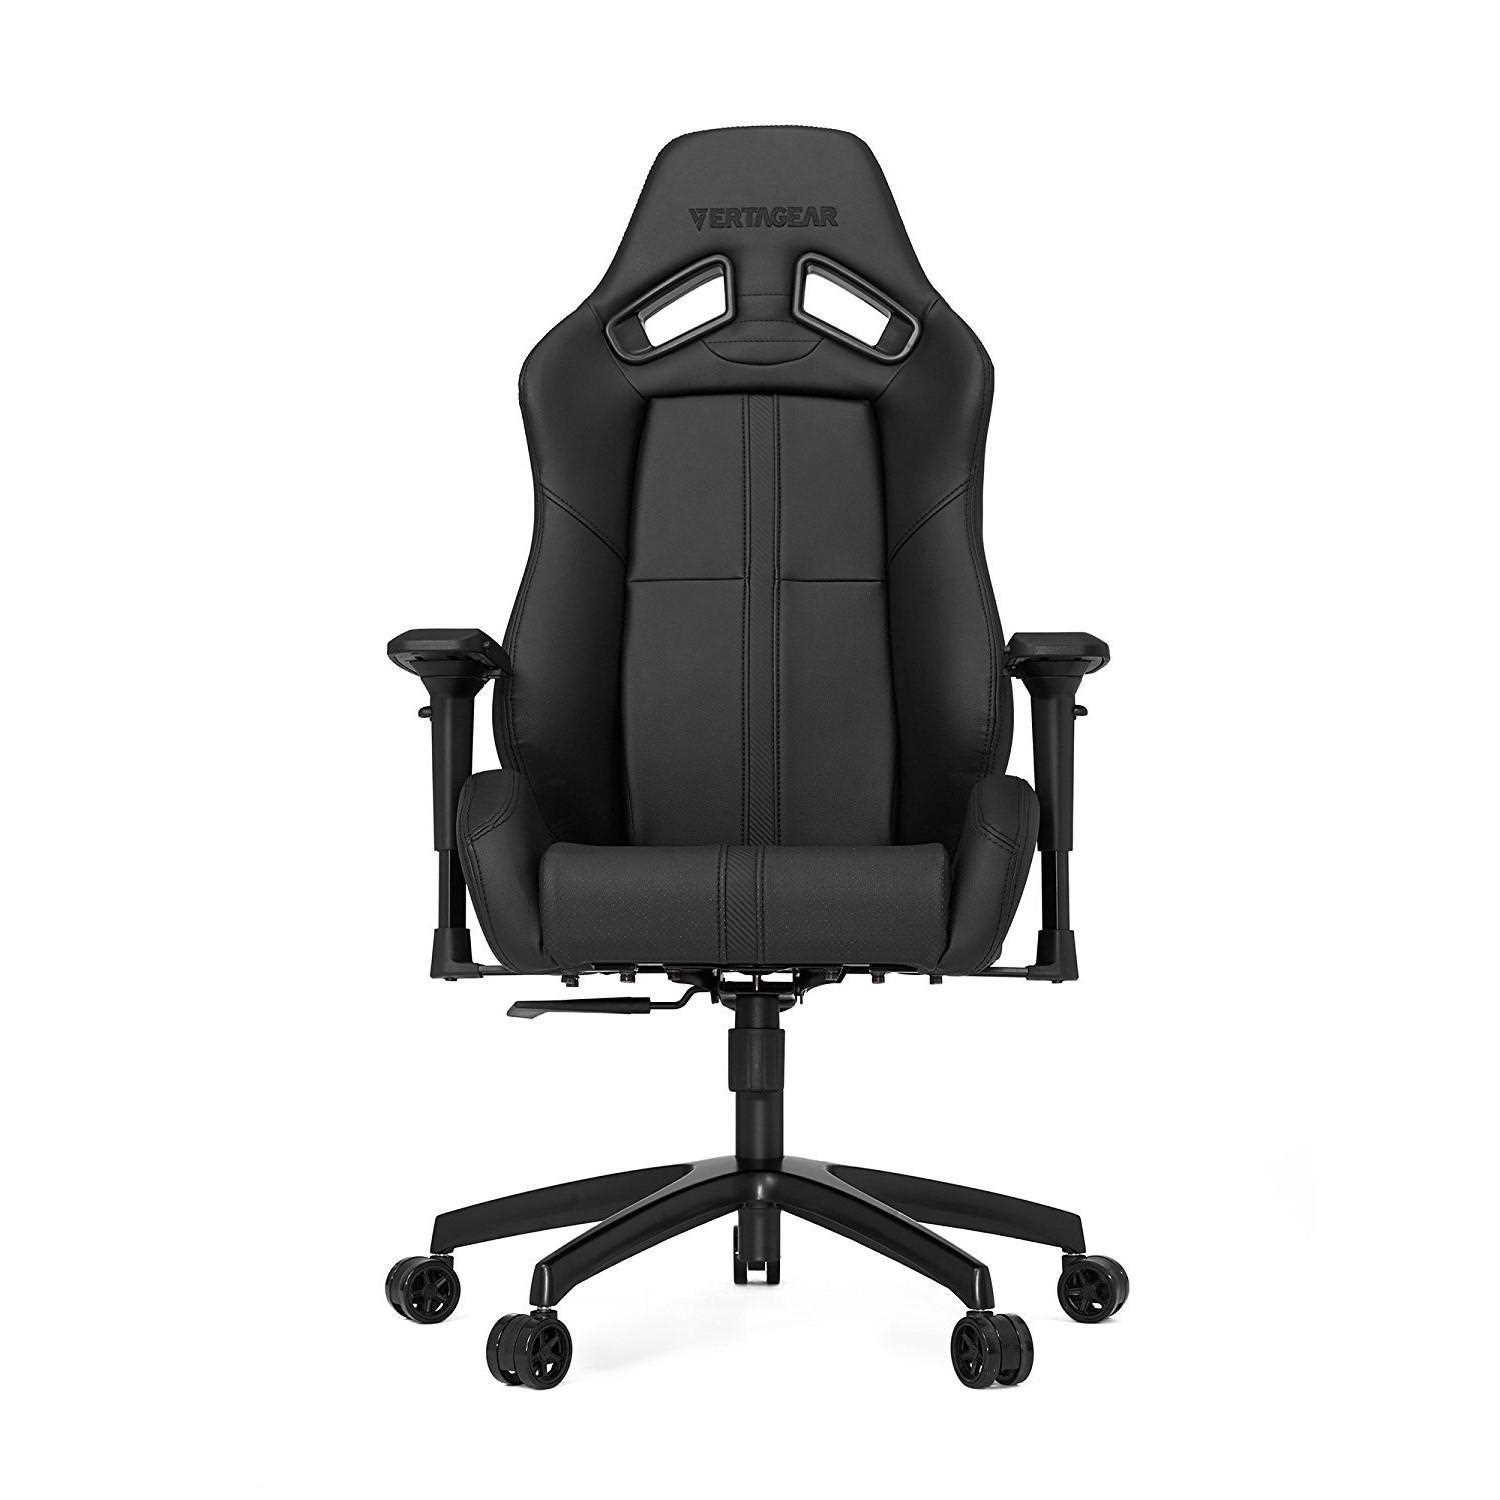 Vertagear S-Line gaming chair (£200-300)